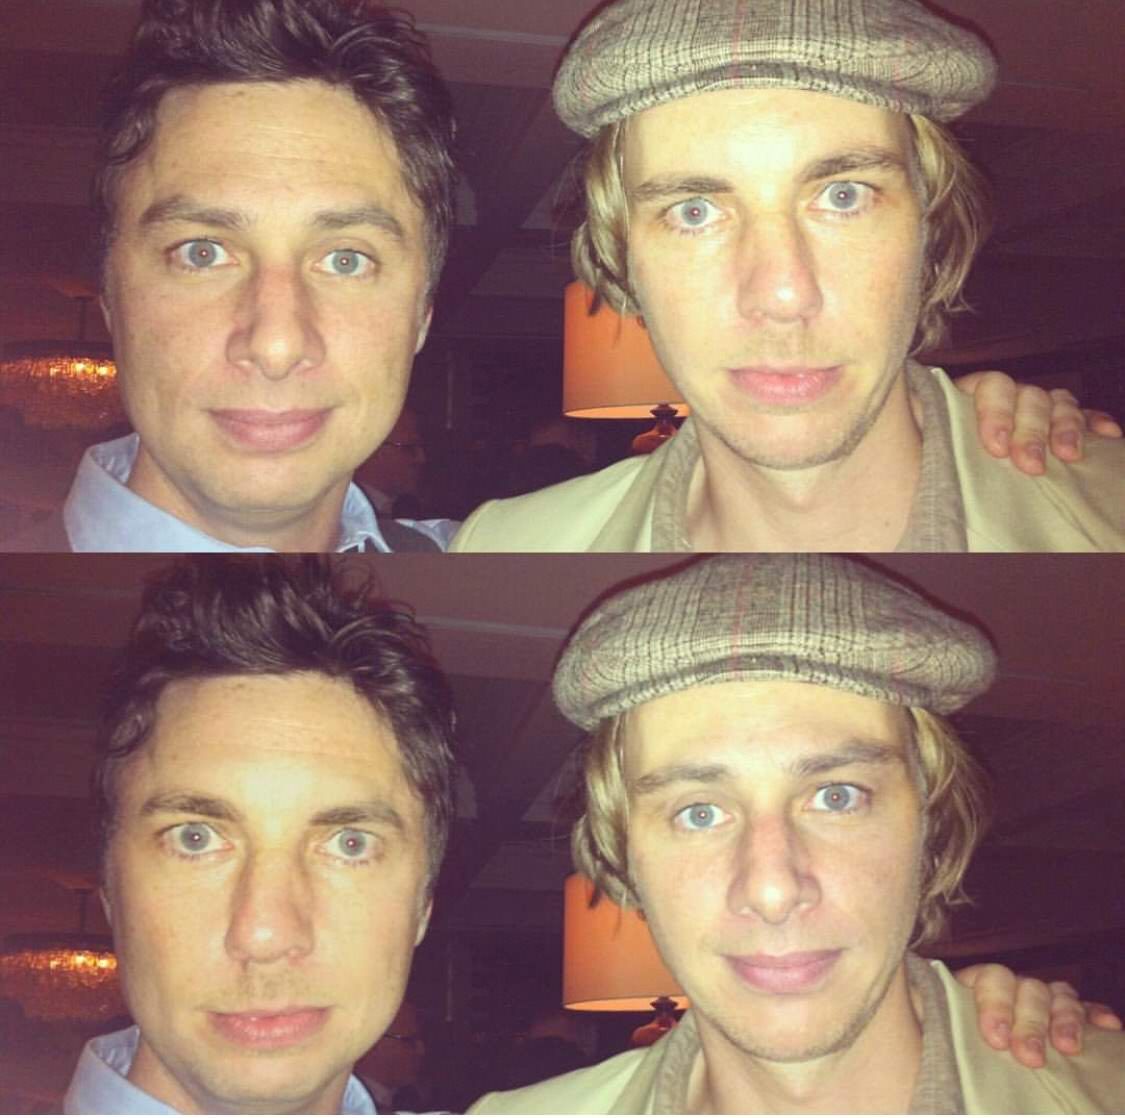 Zach Braff shared this faceswap of himself and Dax Shepard on Twitter